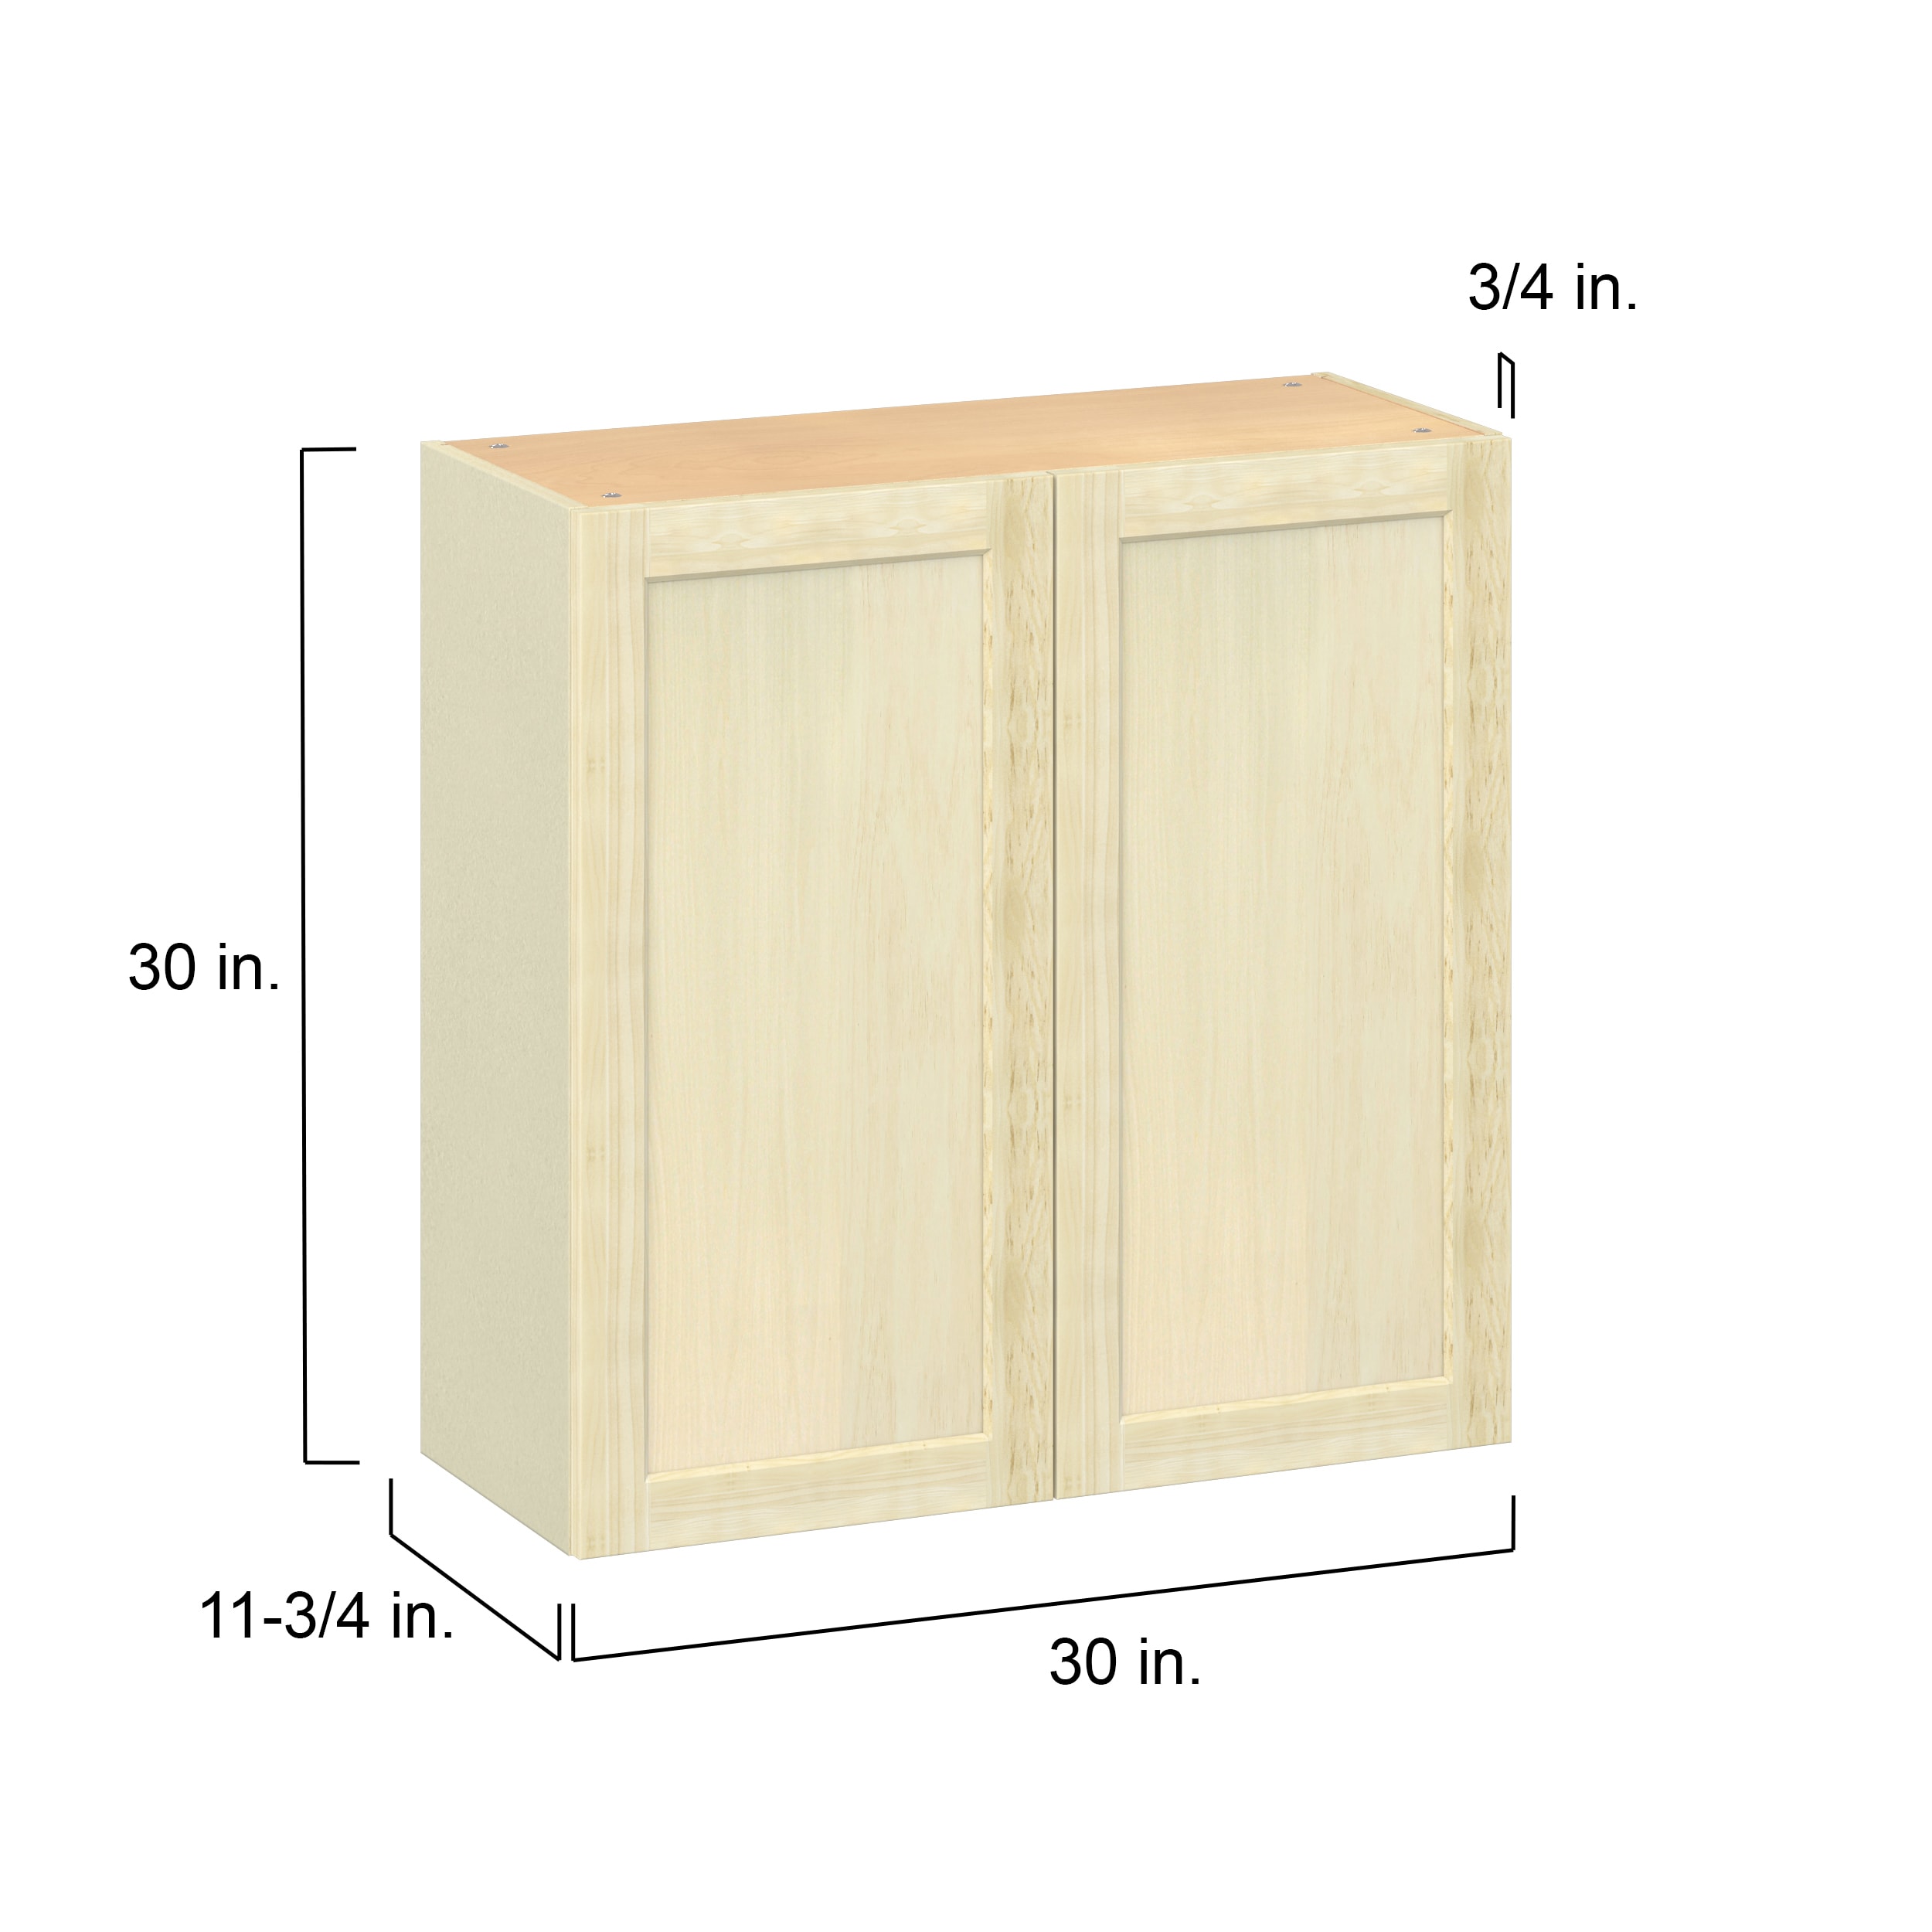 Project Source Omaha Unfinished 60-in W x 34.5-in H x 24.5-in D Unfinished Poplar Sink Base Ready to Assemble Cabinet Recessed Panel Shaker Door